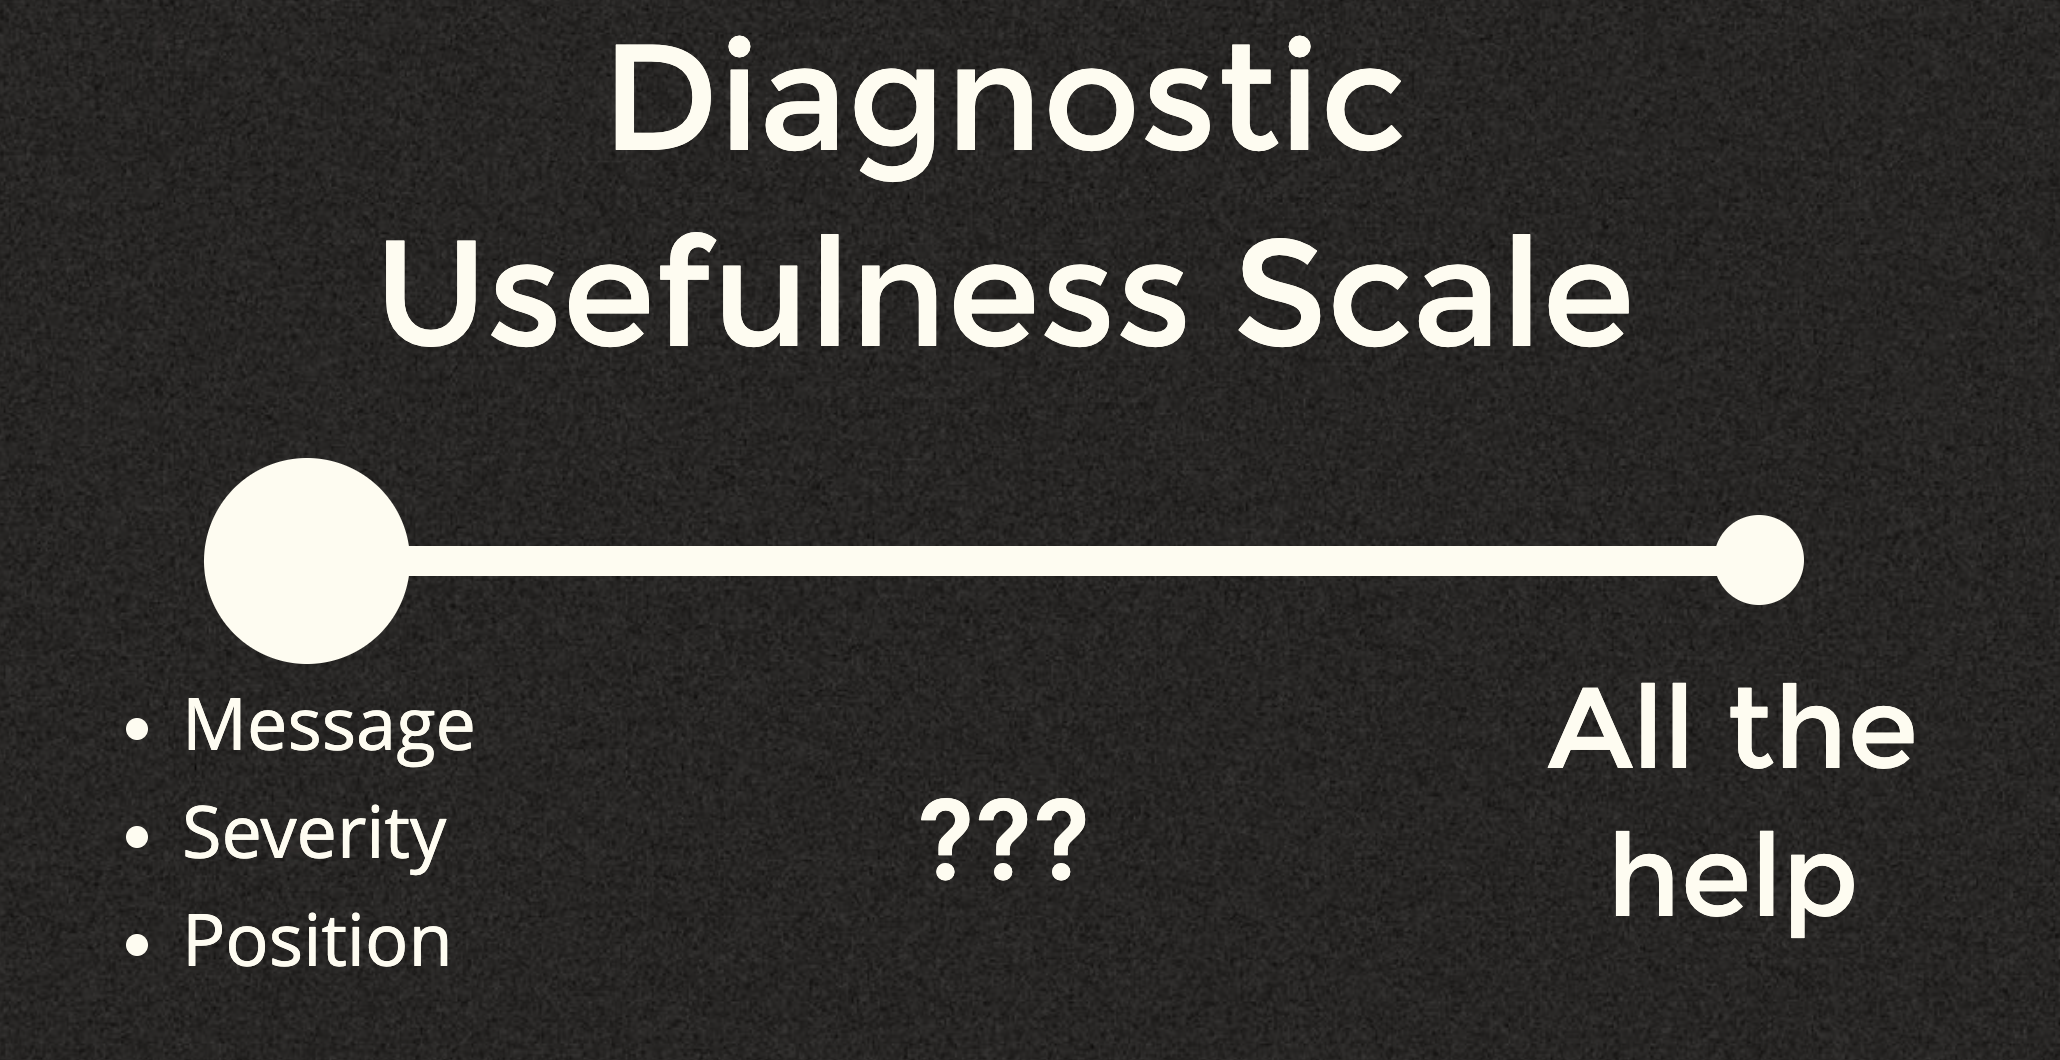 revised diagnostic usefulness scale